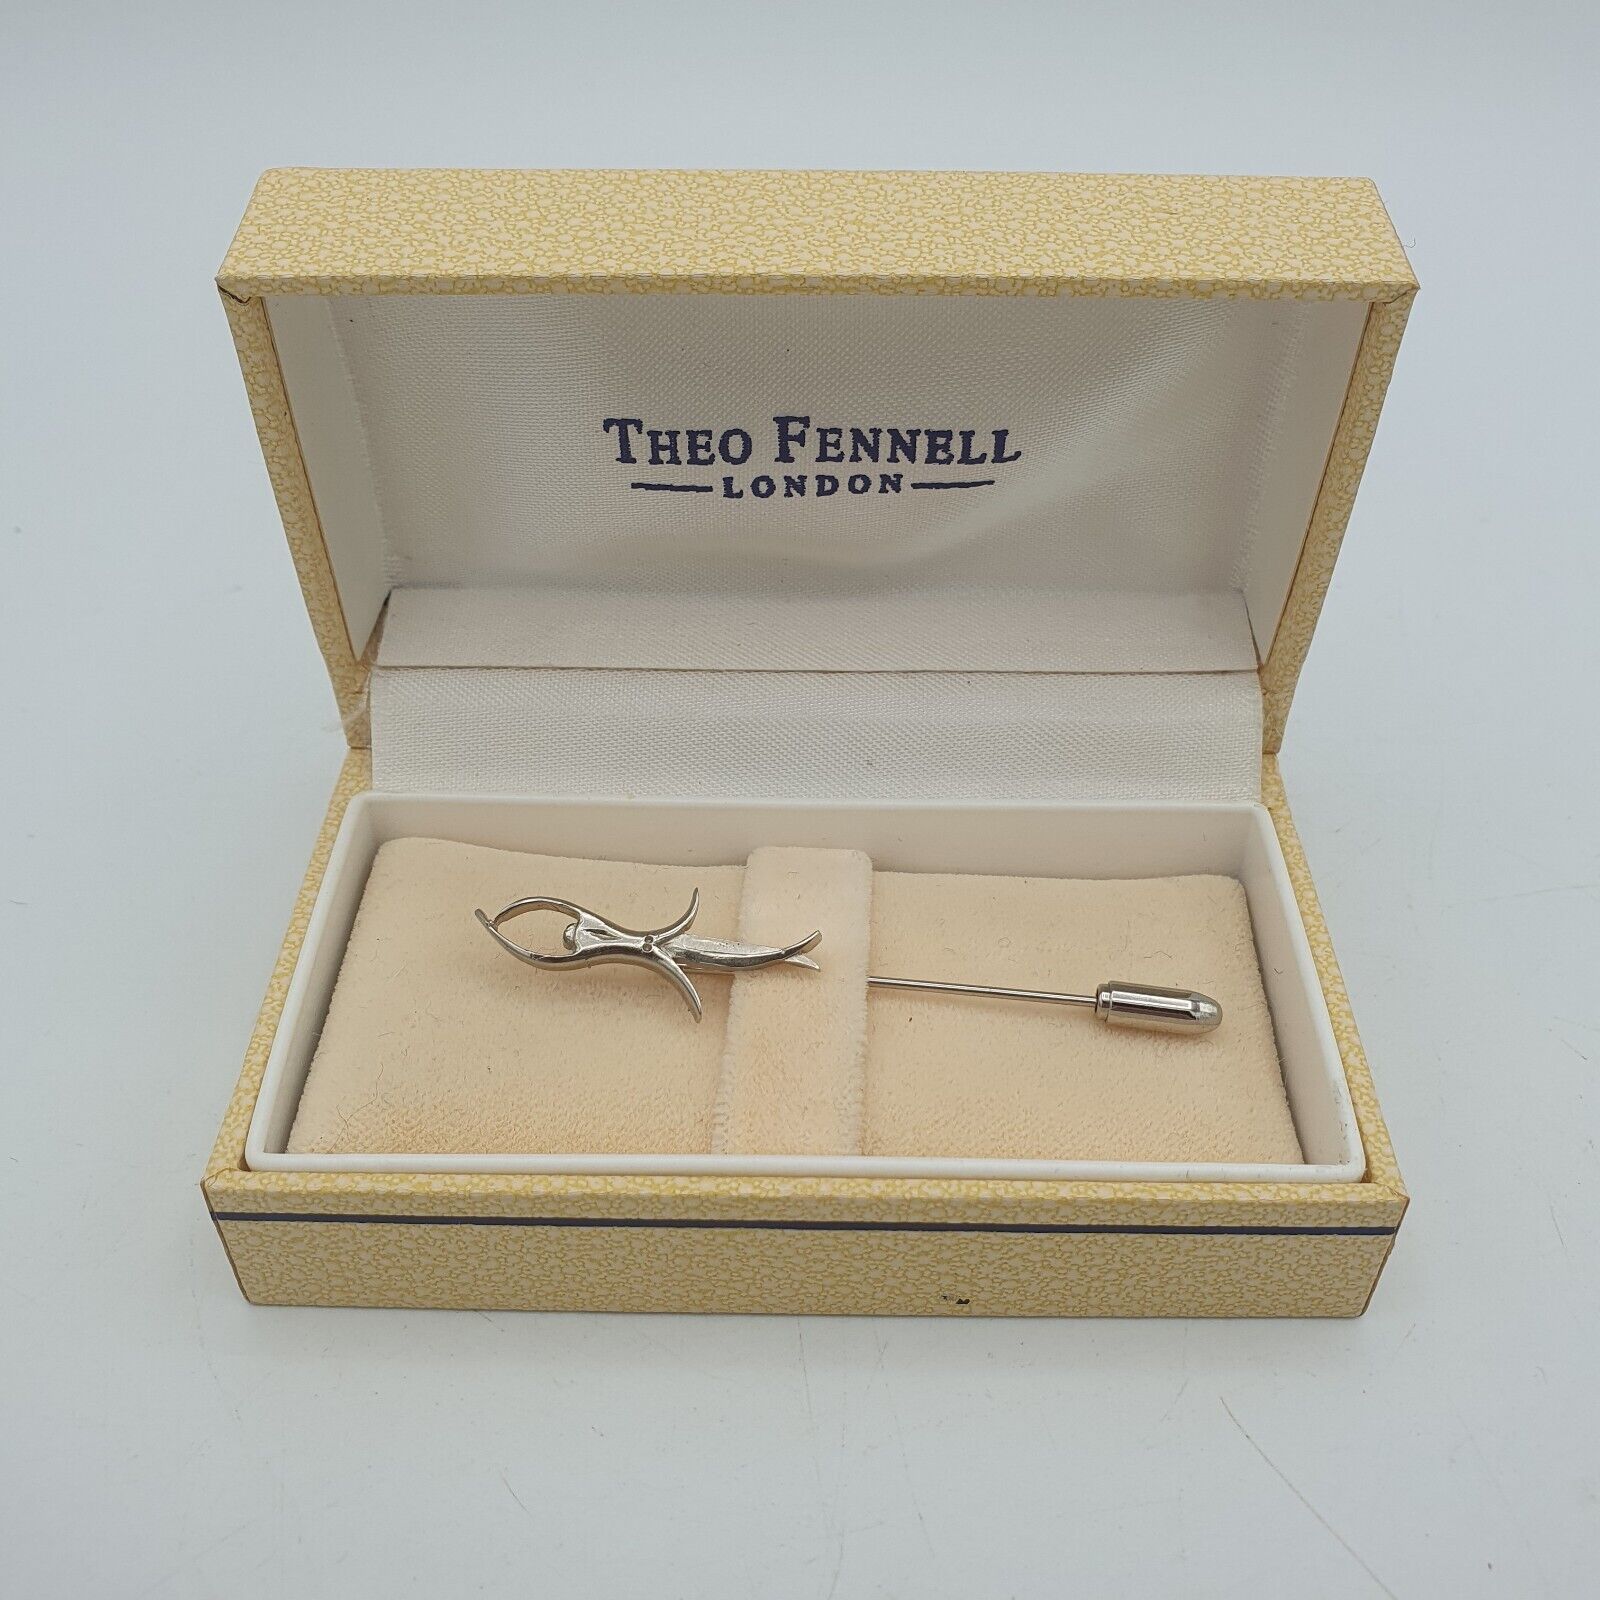 THEO FENNELL TIE PIN. METAL BOXED. RARE MTV MUSIC AWARDS 1992 BOXED